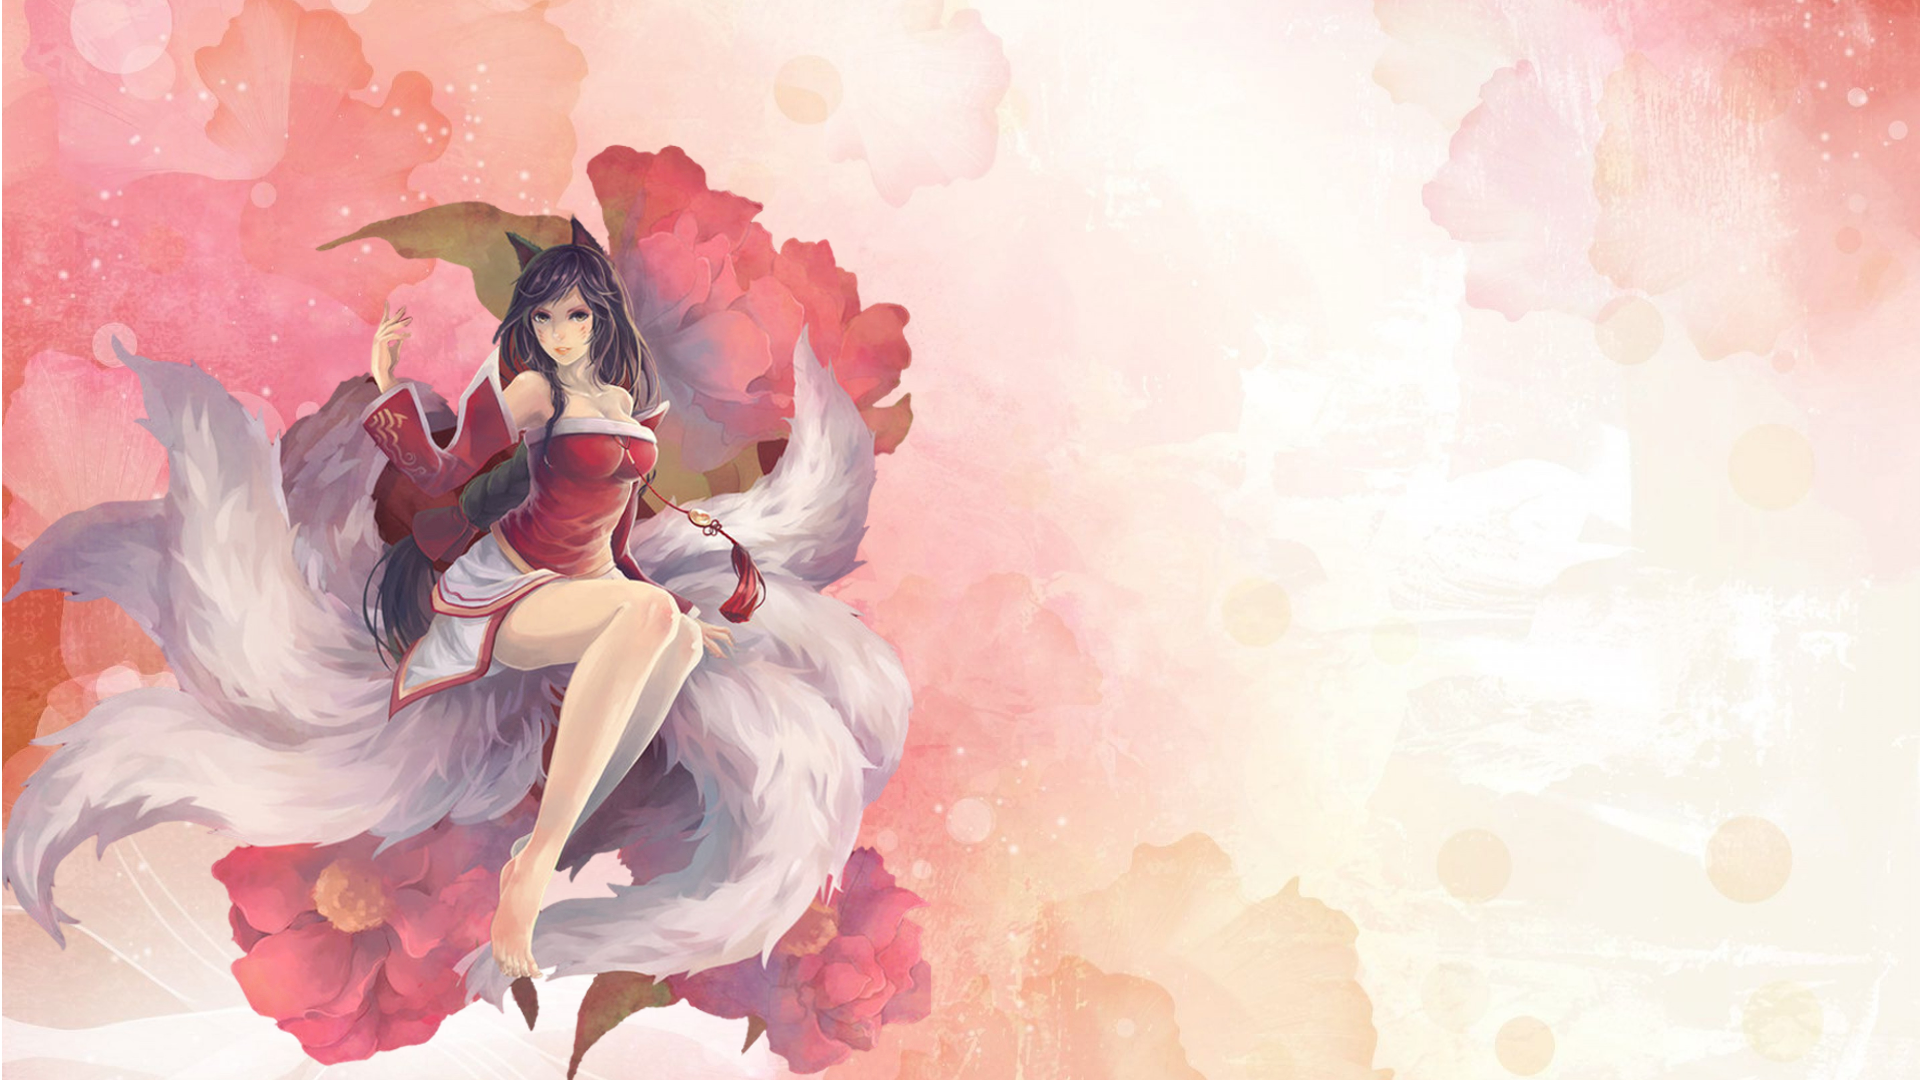 General 1920x1080 Ahri (League of Legends) League of Legends anime girls big boobs video games PC gaming fantasy art fantasy girl legs together dark hair animal ears looking at viewer video game art video game girls anime barefoot